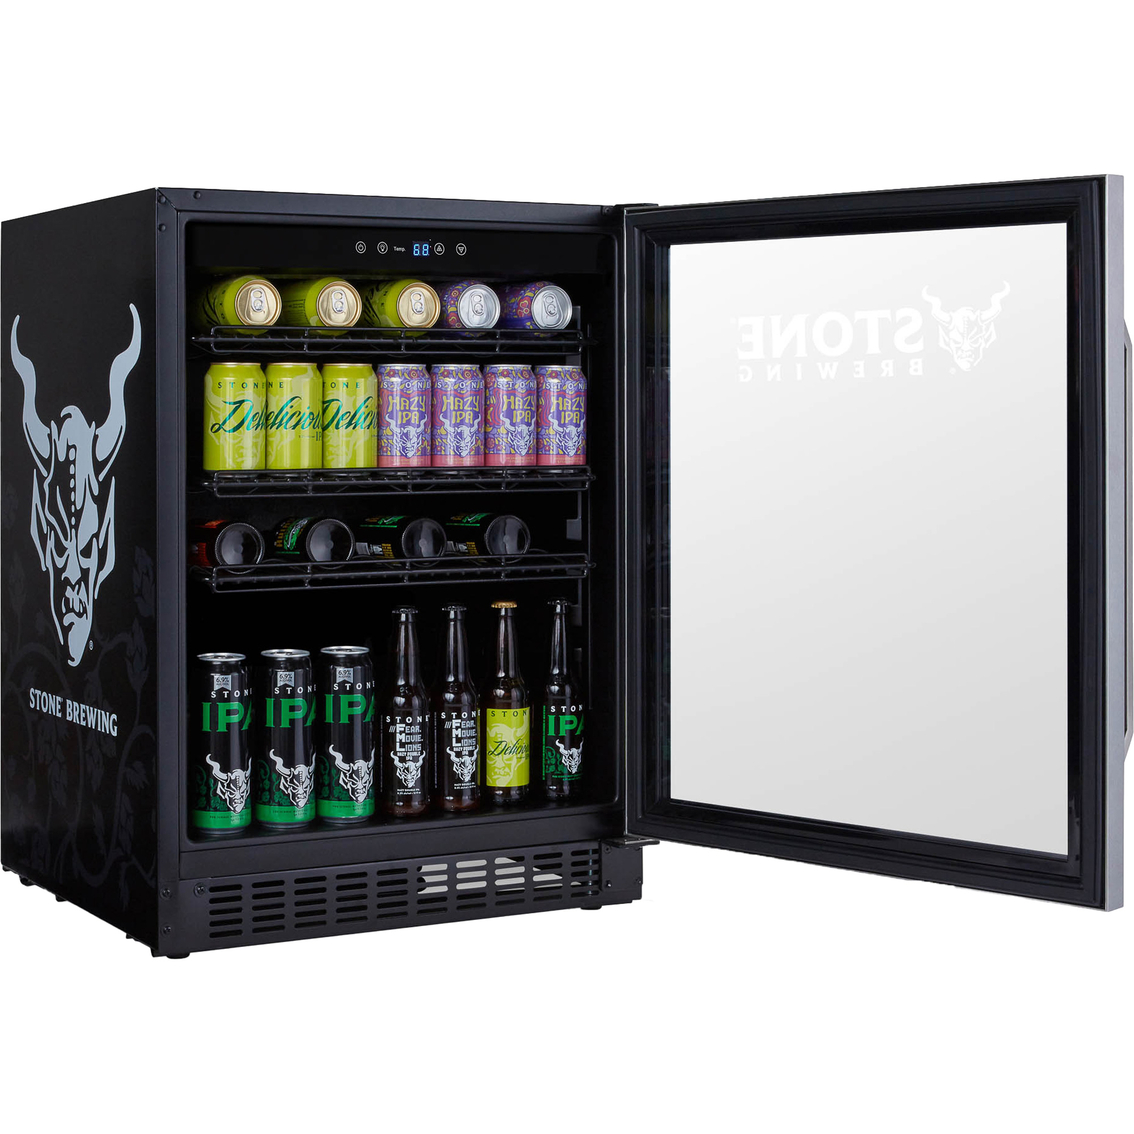 New Air LLC Stone Brewing 180 Can FlipShelf Beer and Beverage Refrigerator - Image 7 of 10